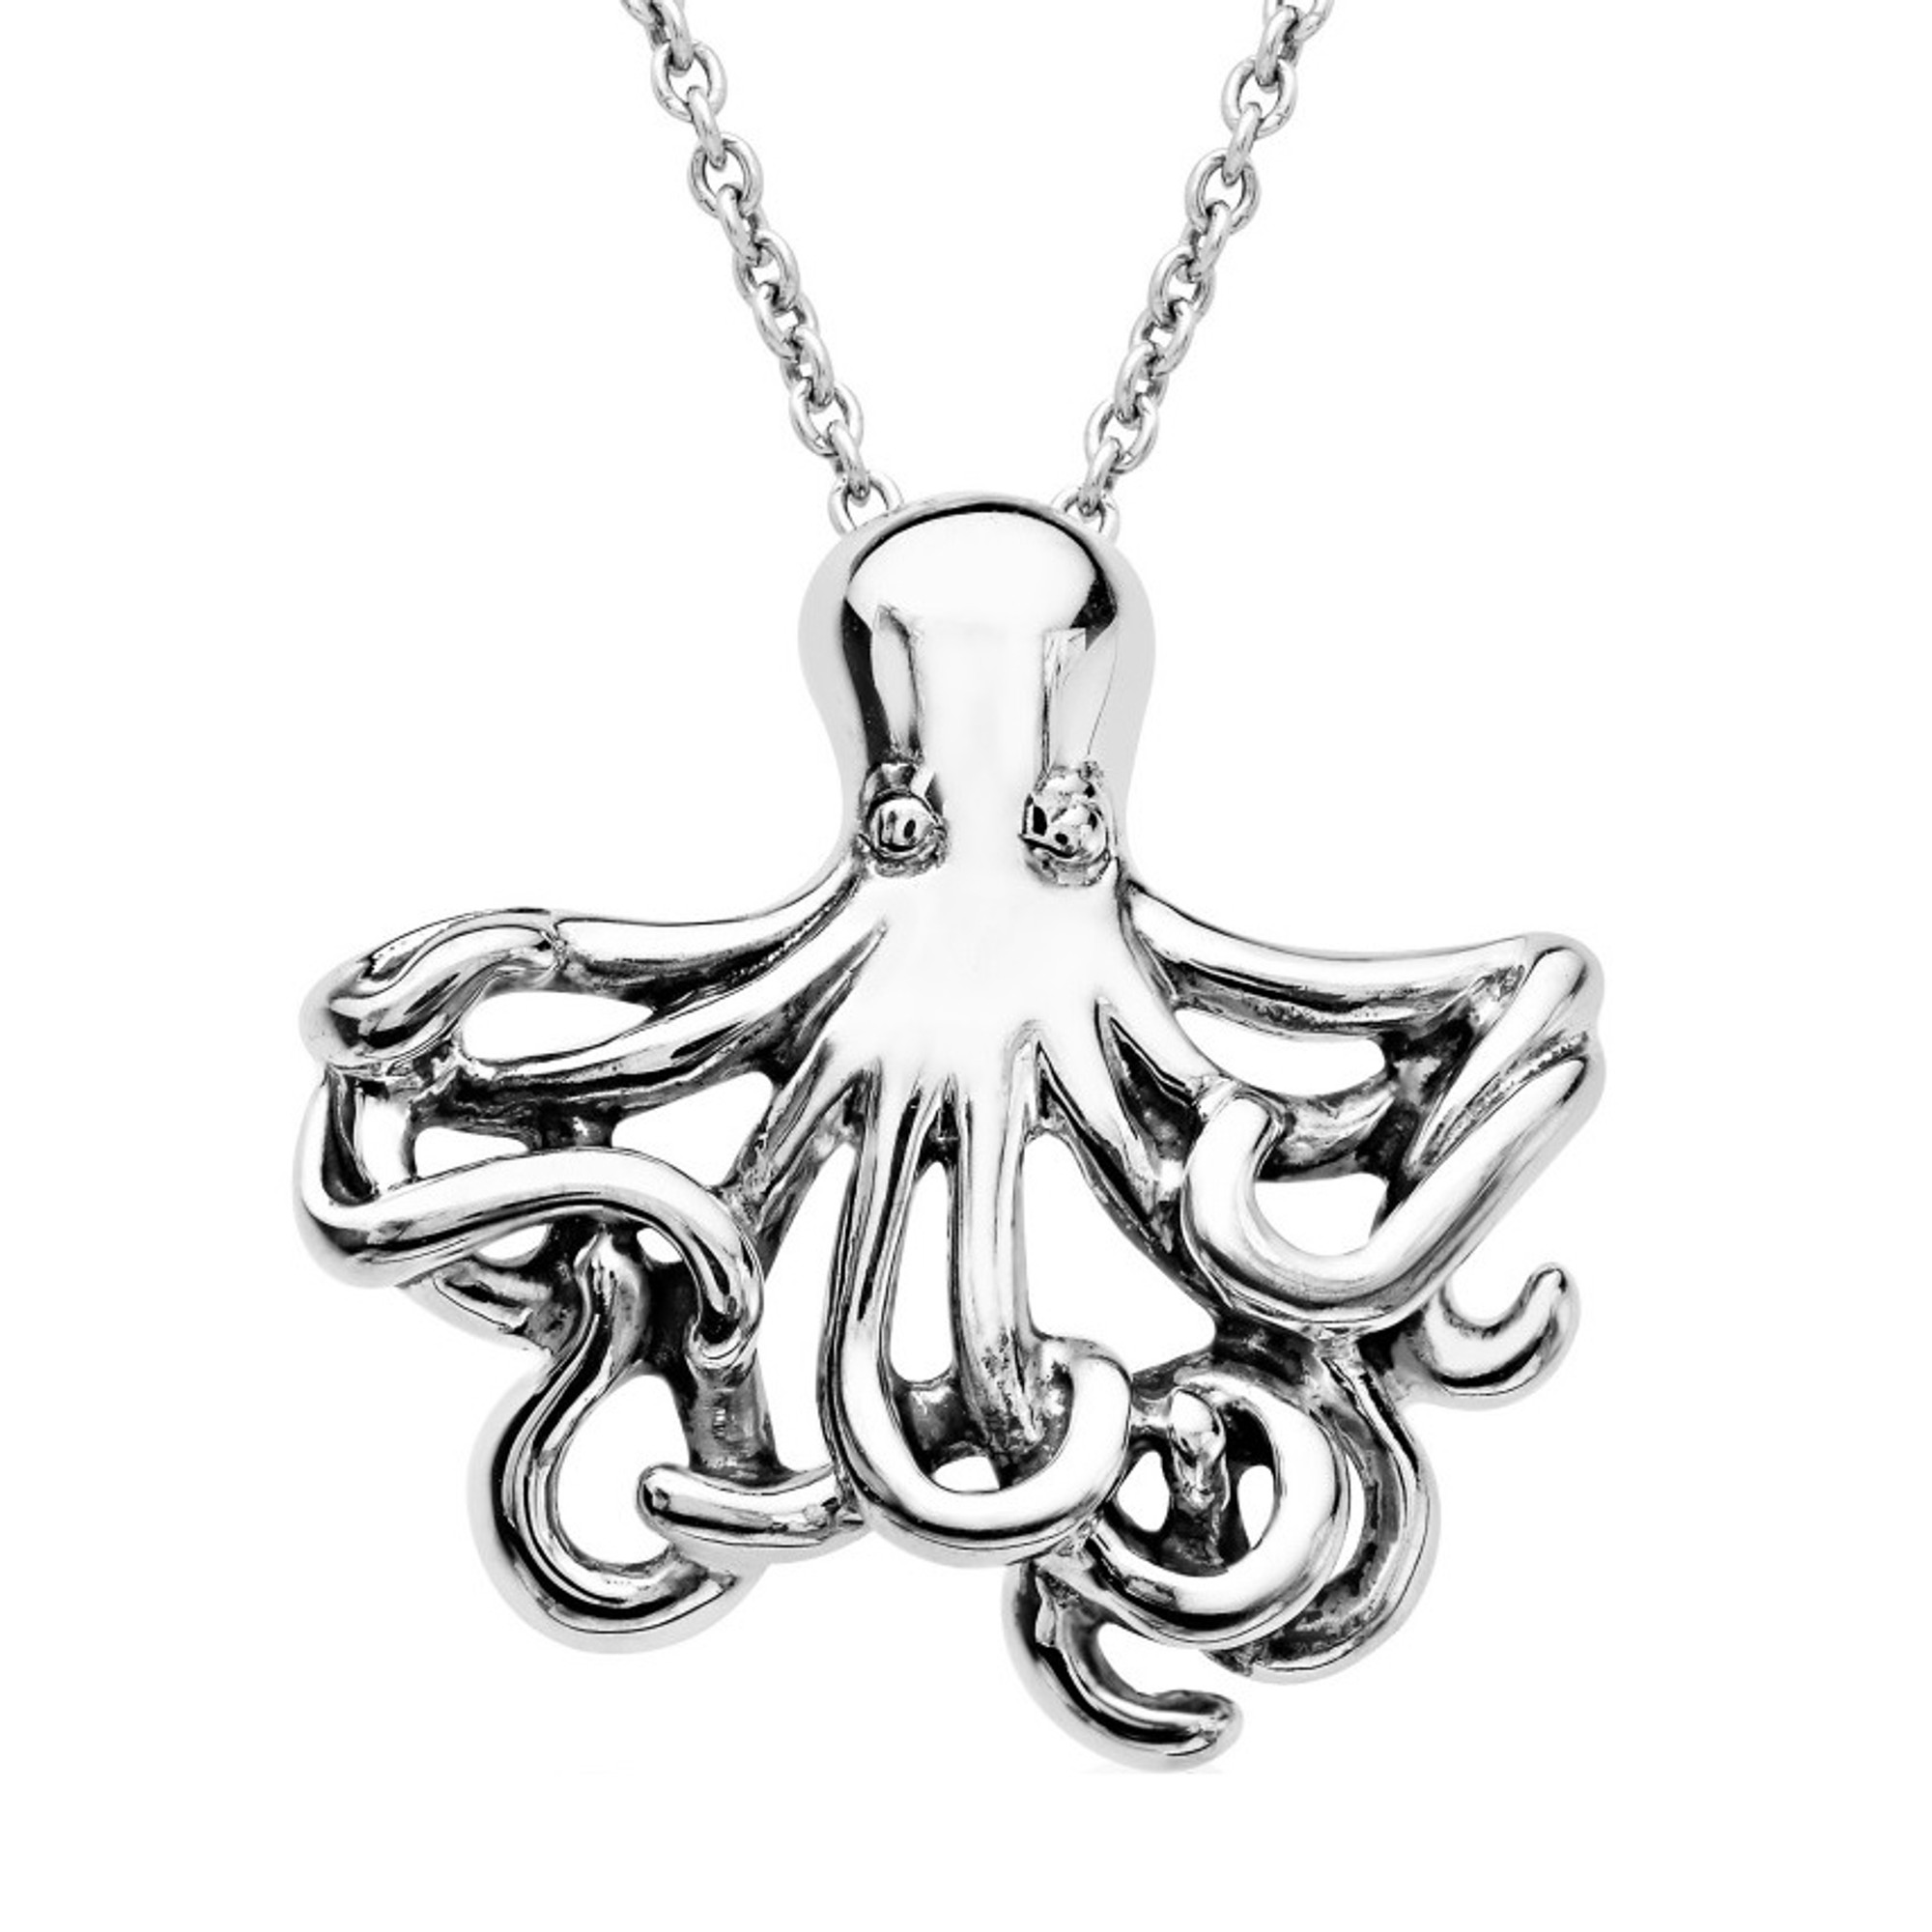 Sterling silver octopus necklace octopus jewelry.